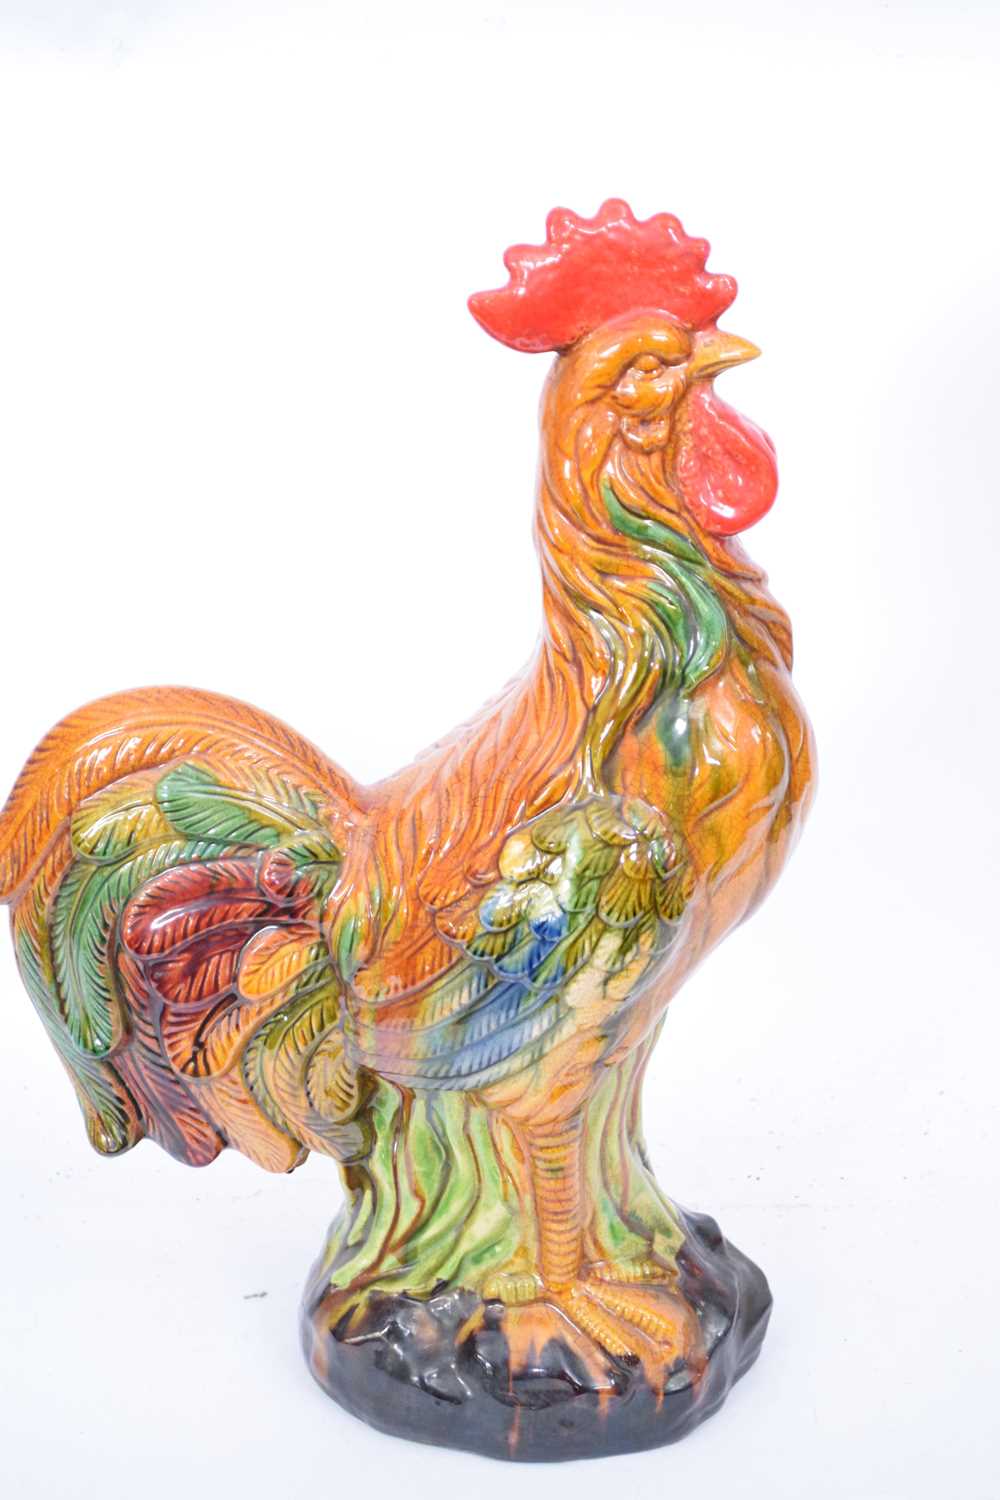 Large ceramic model of a chicken in Majolica glazes - Image 3 of 3